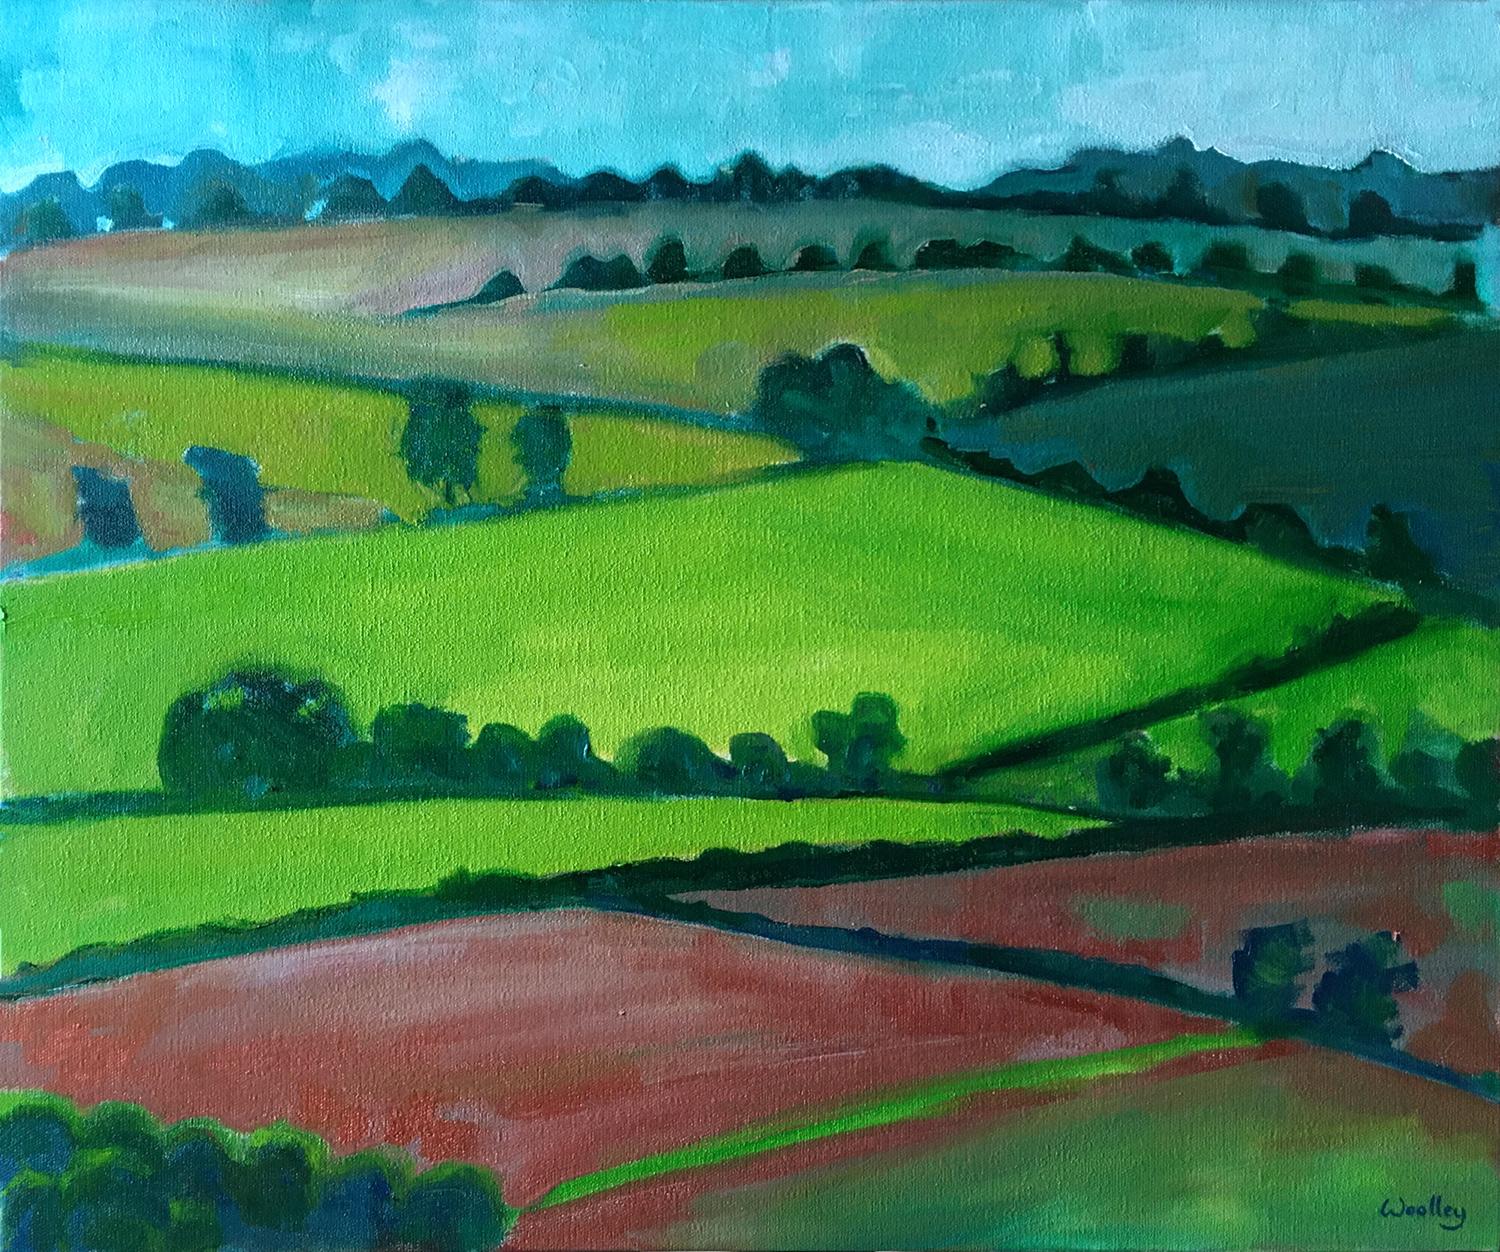 Still-Life Painting Eleanor Woolley - The View from Great Rollright, Cotswolds, Peinture originale, Paysage, Nature